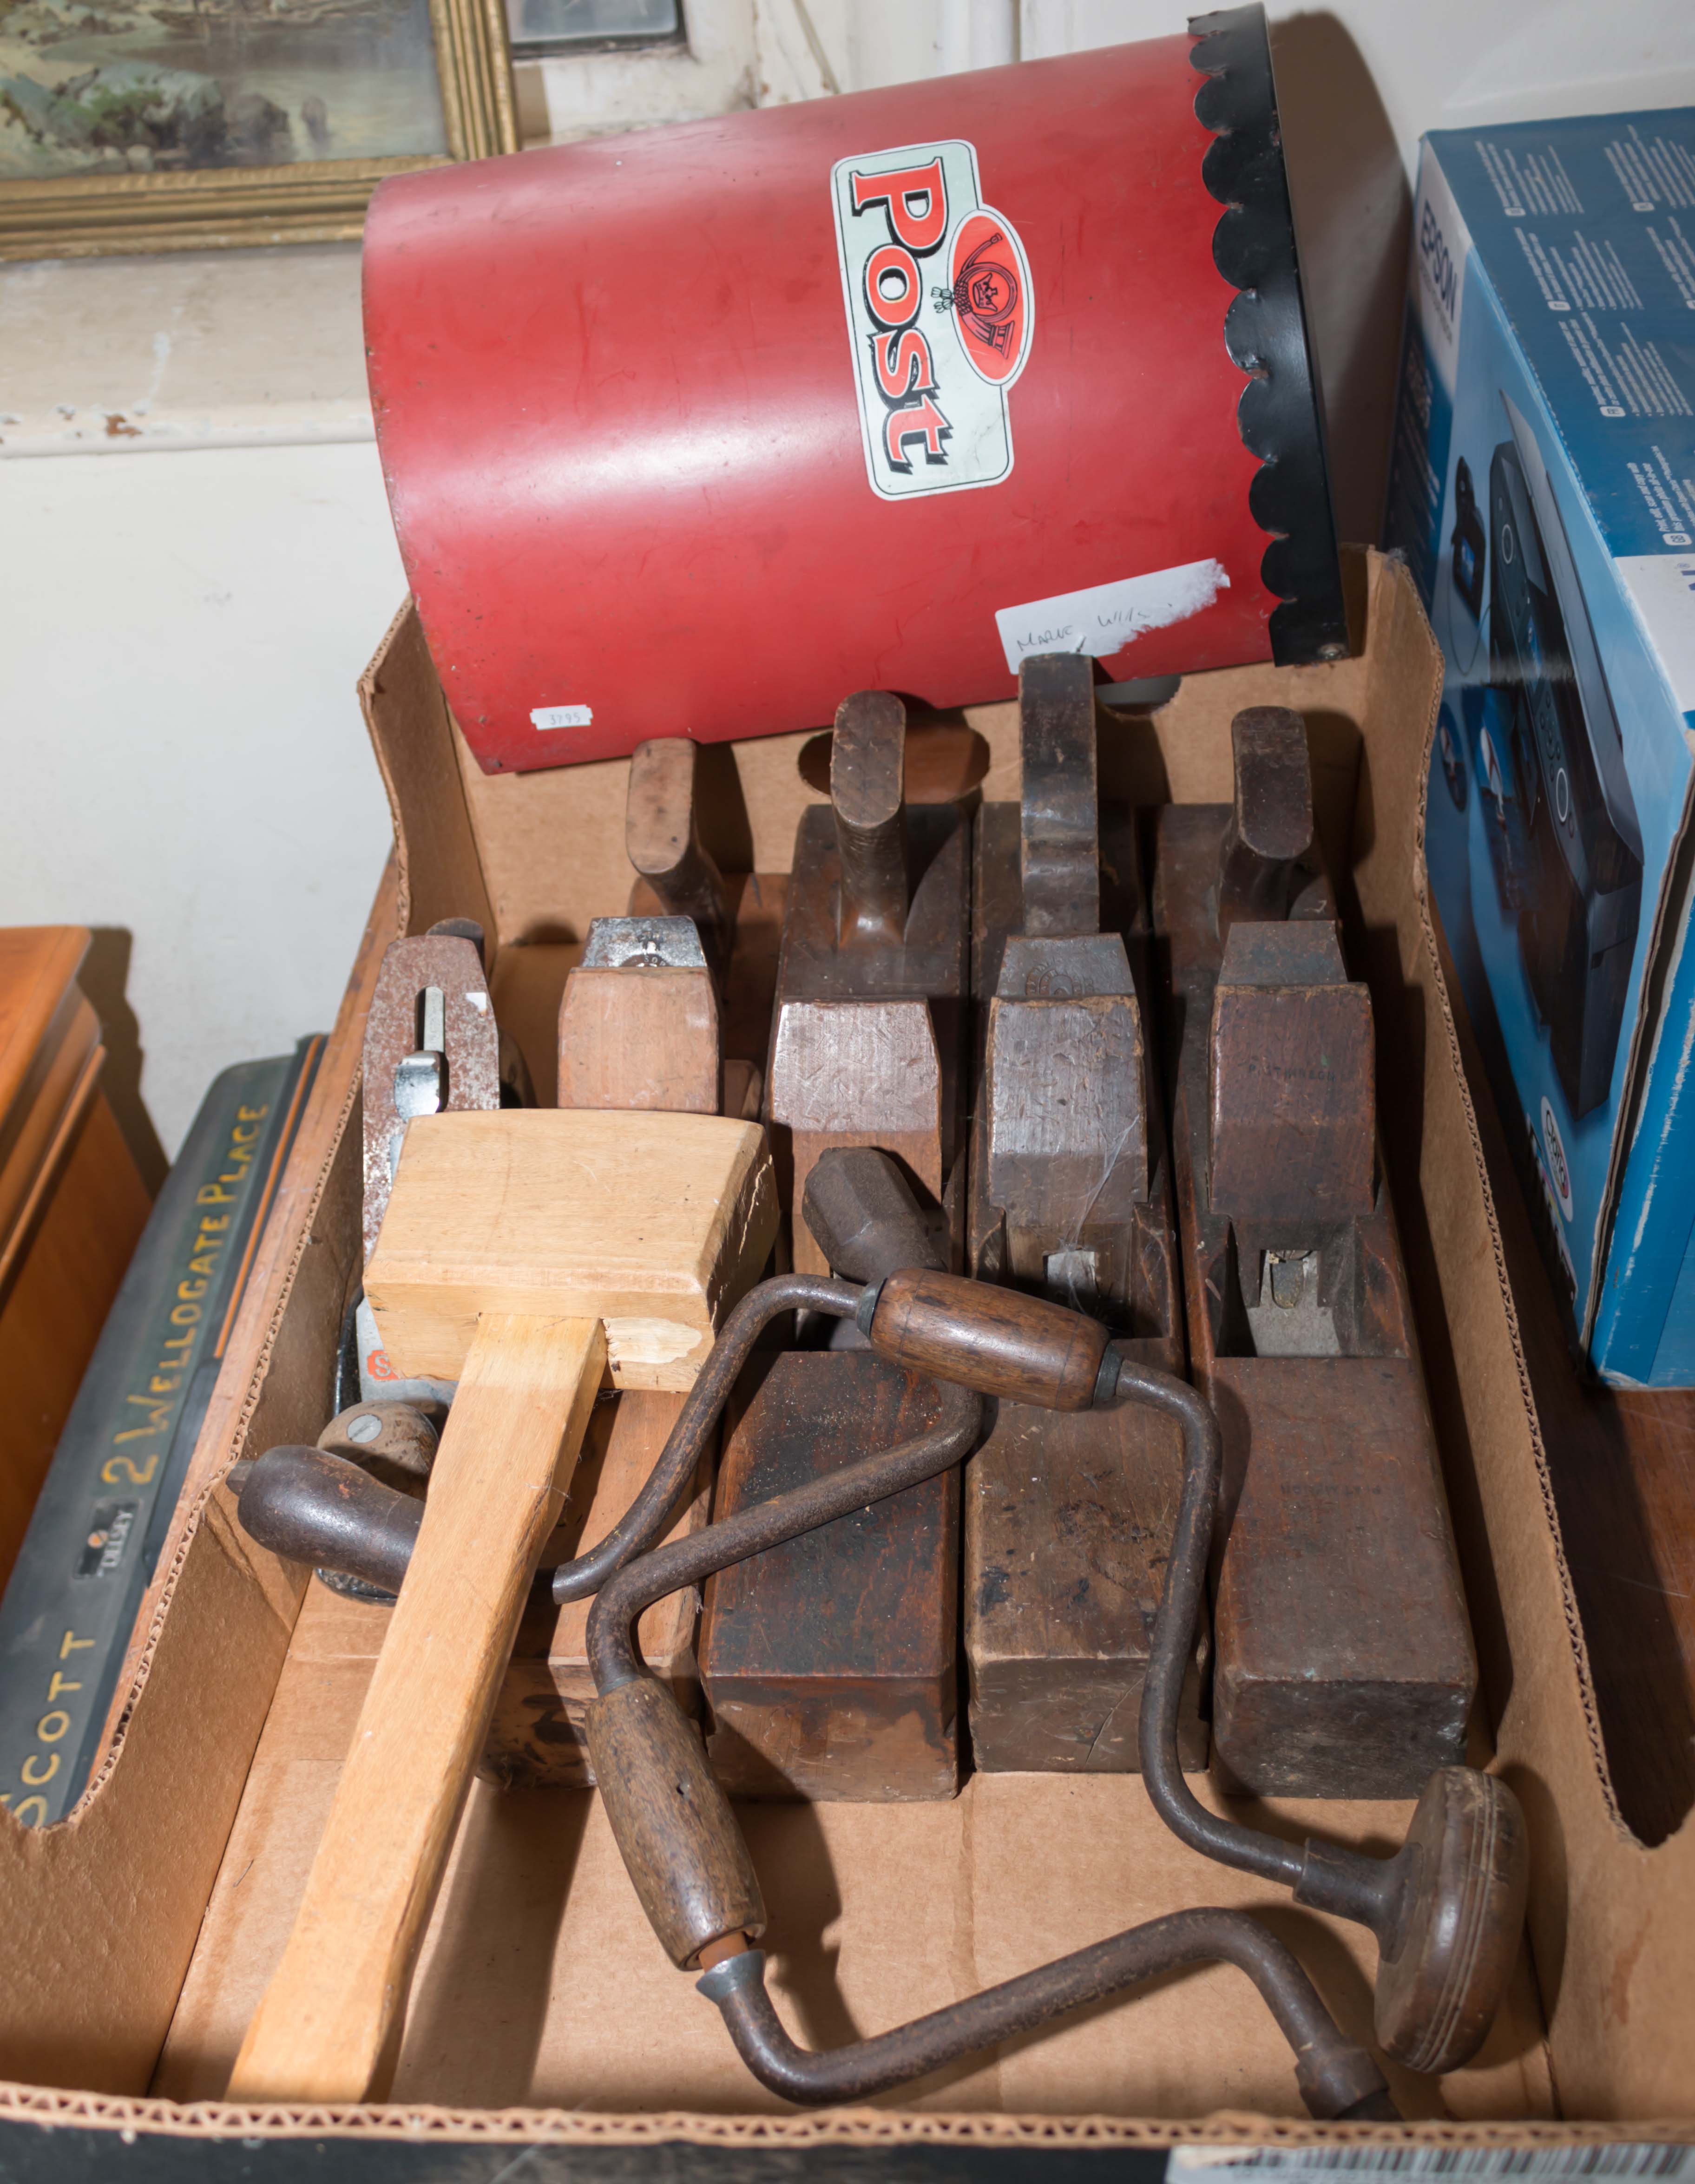 A box containing vintage planes and other tools